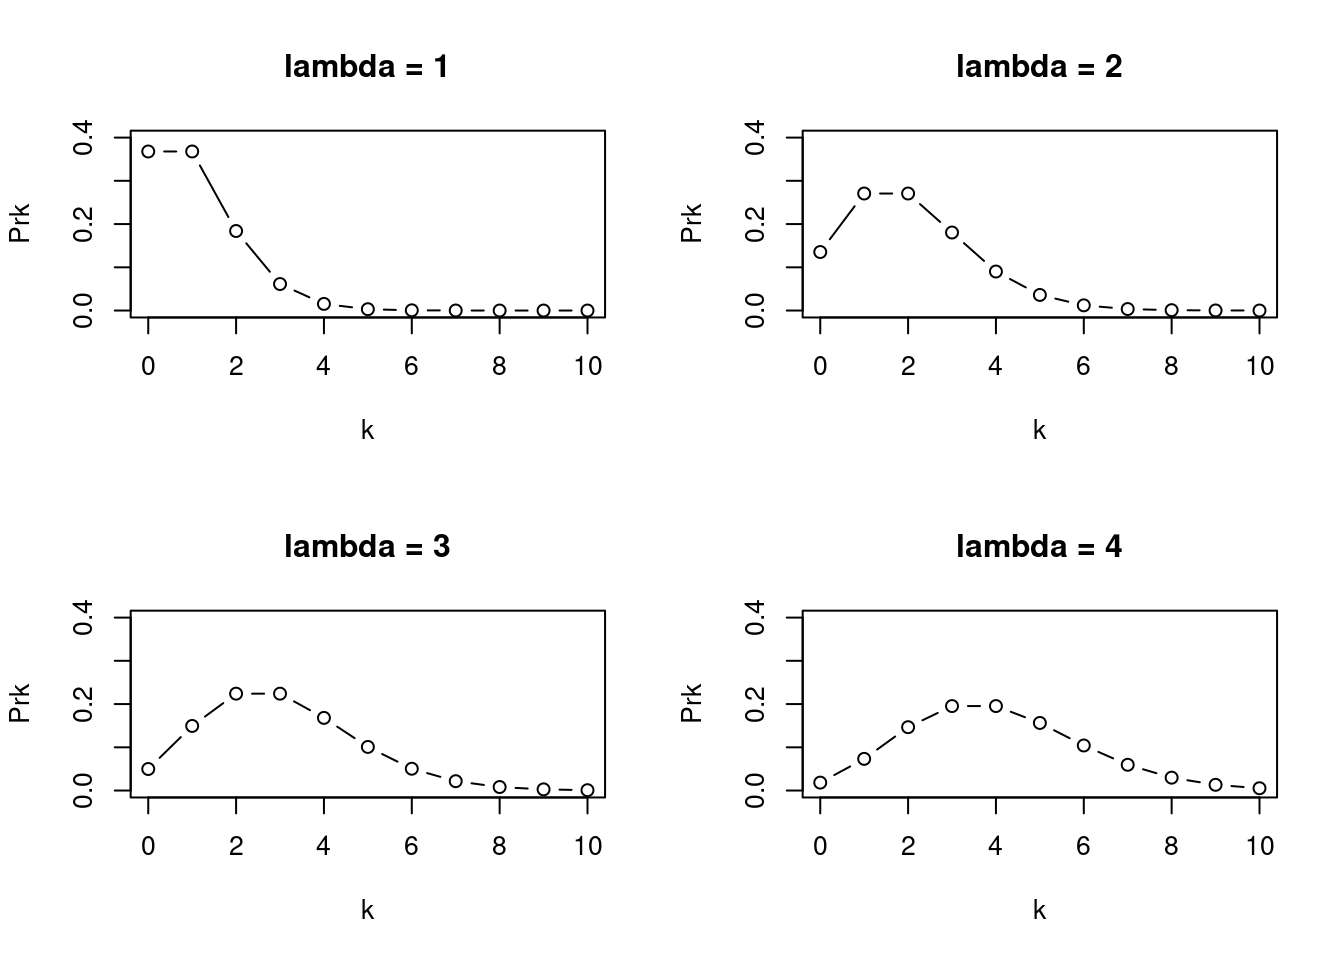 _Plots of Poisson Distributions with different lambda values, showing how variance increases with increasing lambda. Note all values are non-negative integer values, suitable for modelling counts, k._